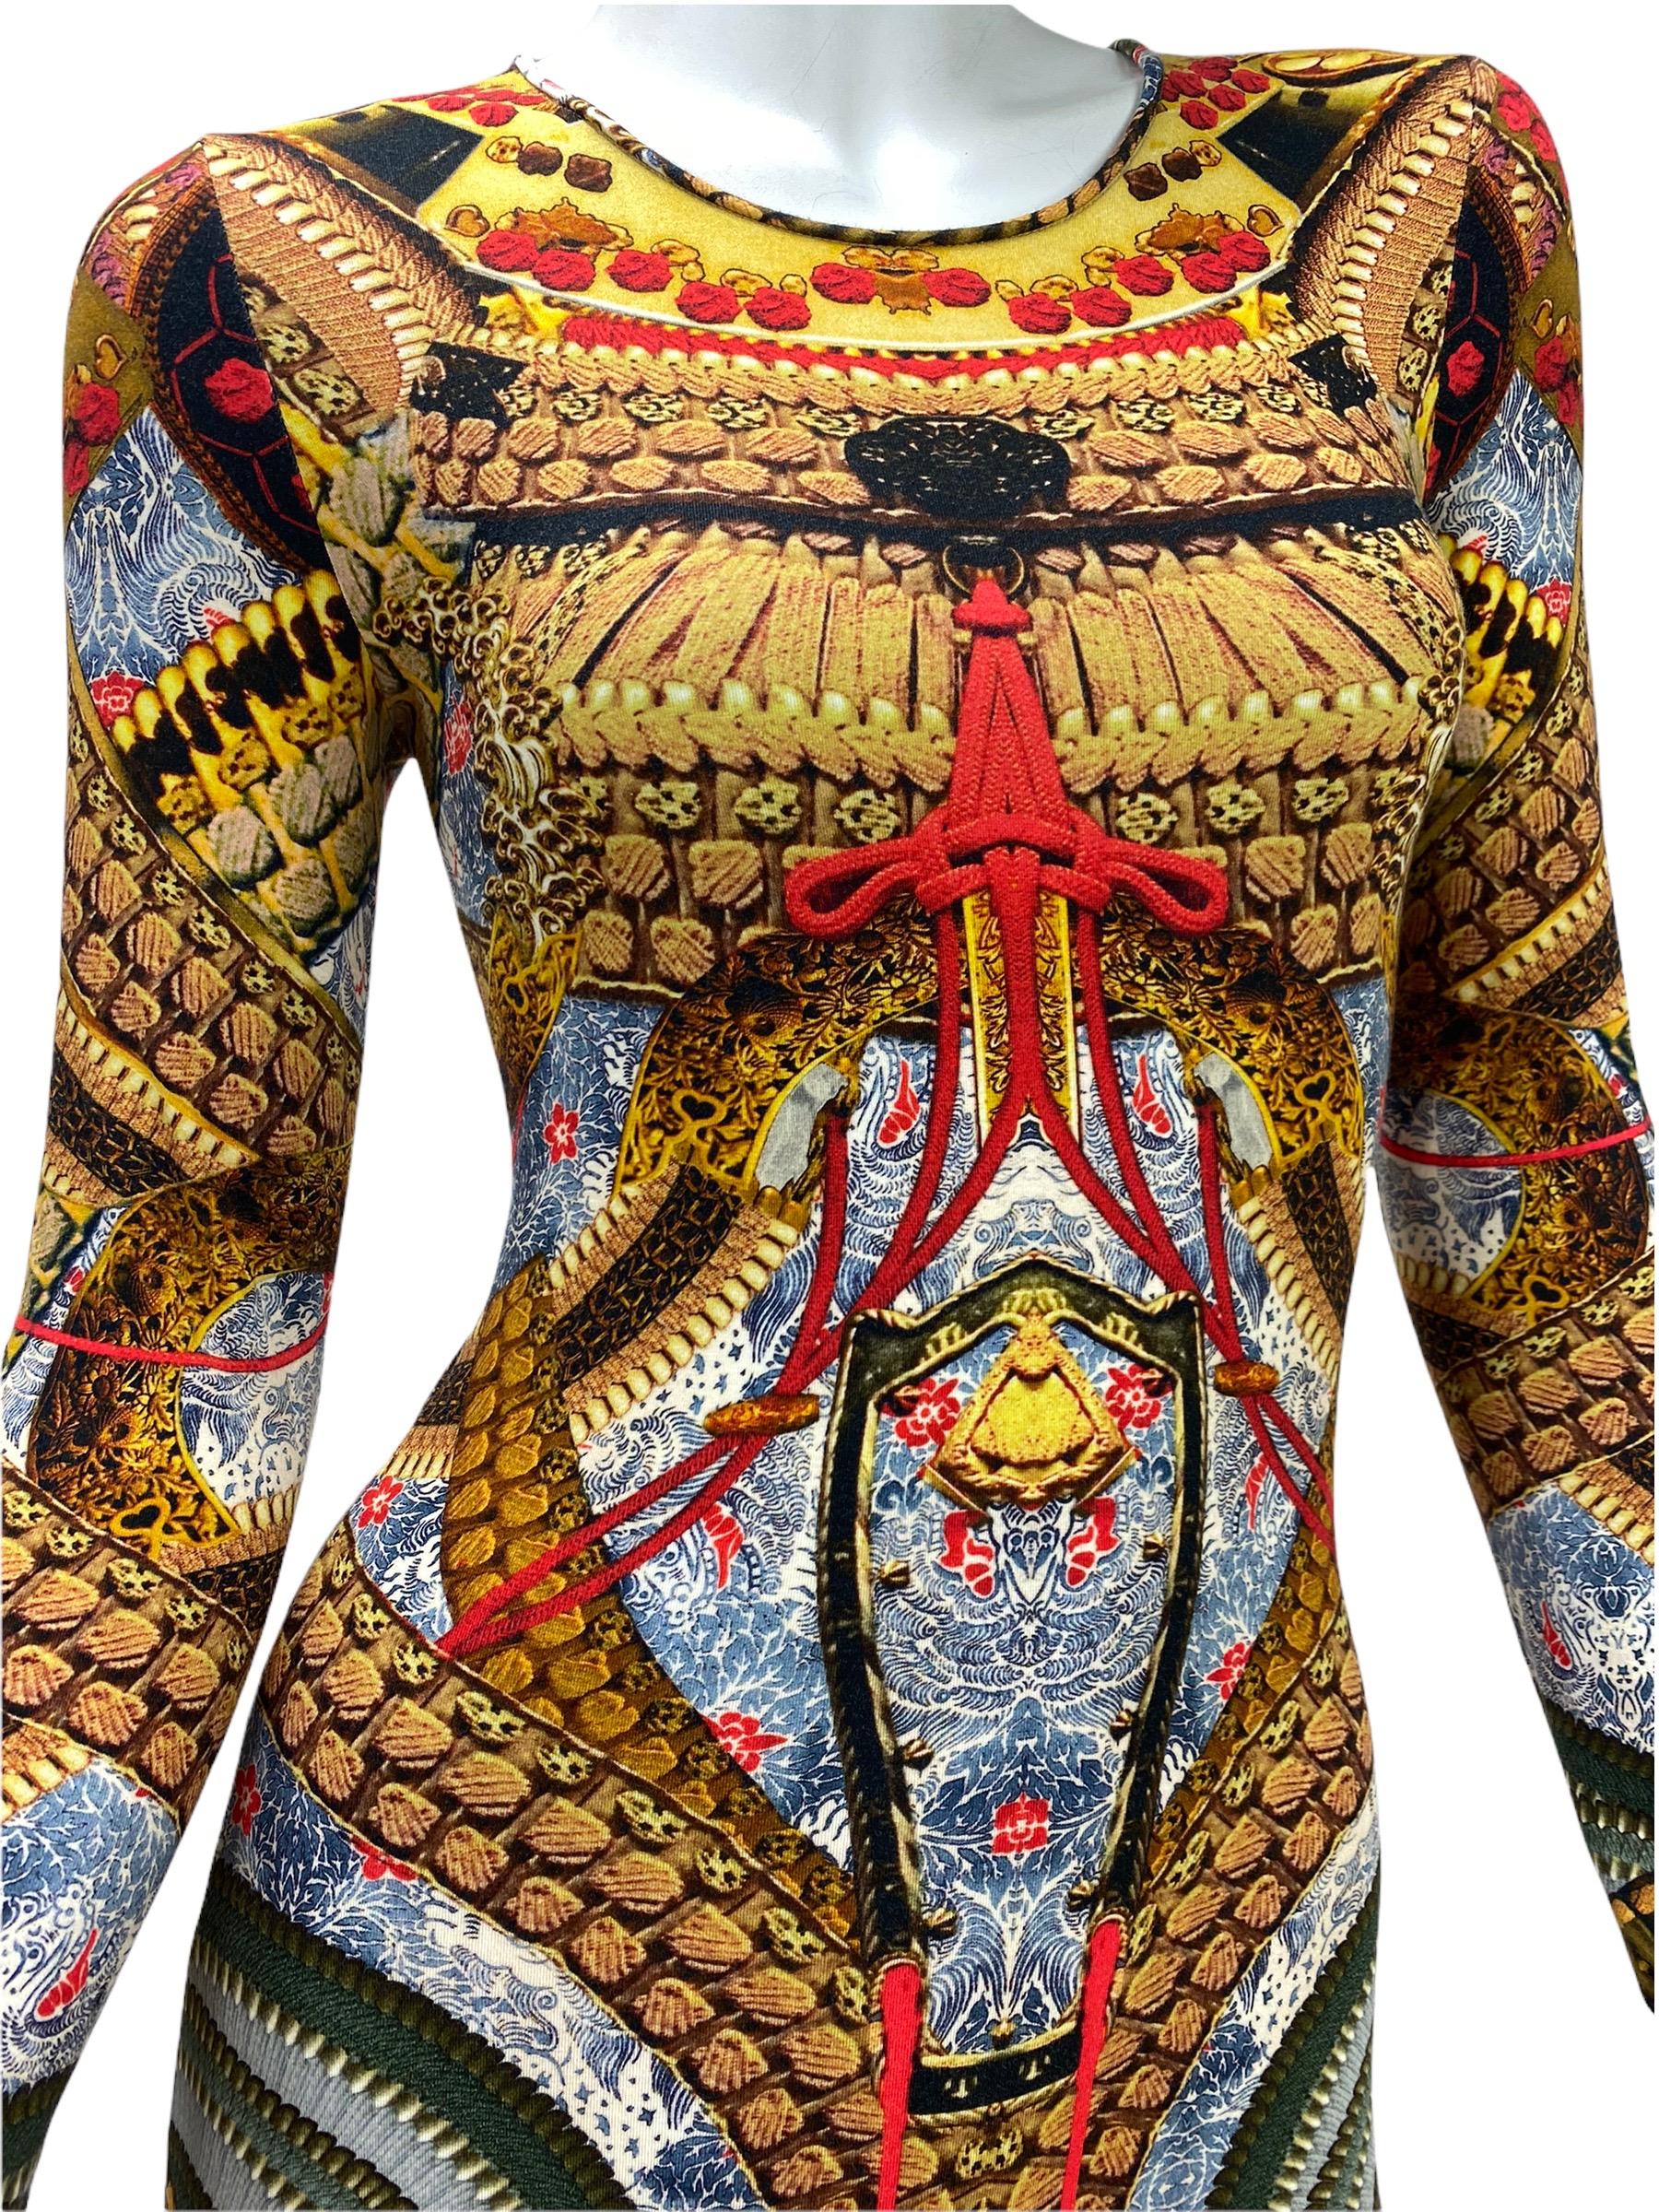 2010 Alexander McQueen Samurai Print Dress

IT Size 38

90% Viscose, 10% Elastine

Knee length, long sleeves, zip closure on the back.

Made in Italy

New, without tags. Excellent condition.